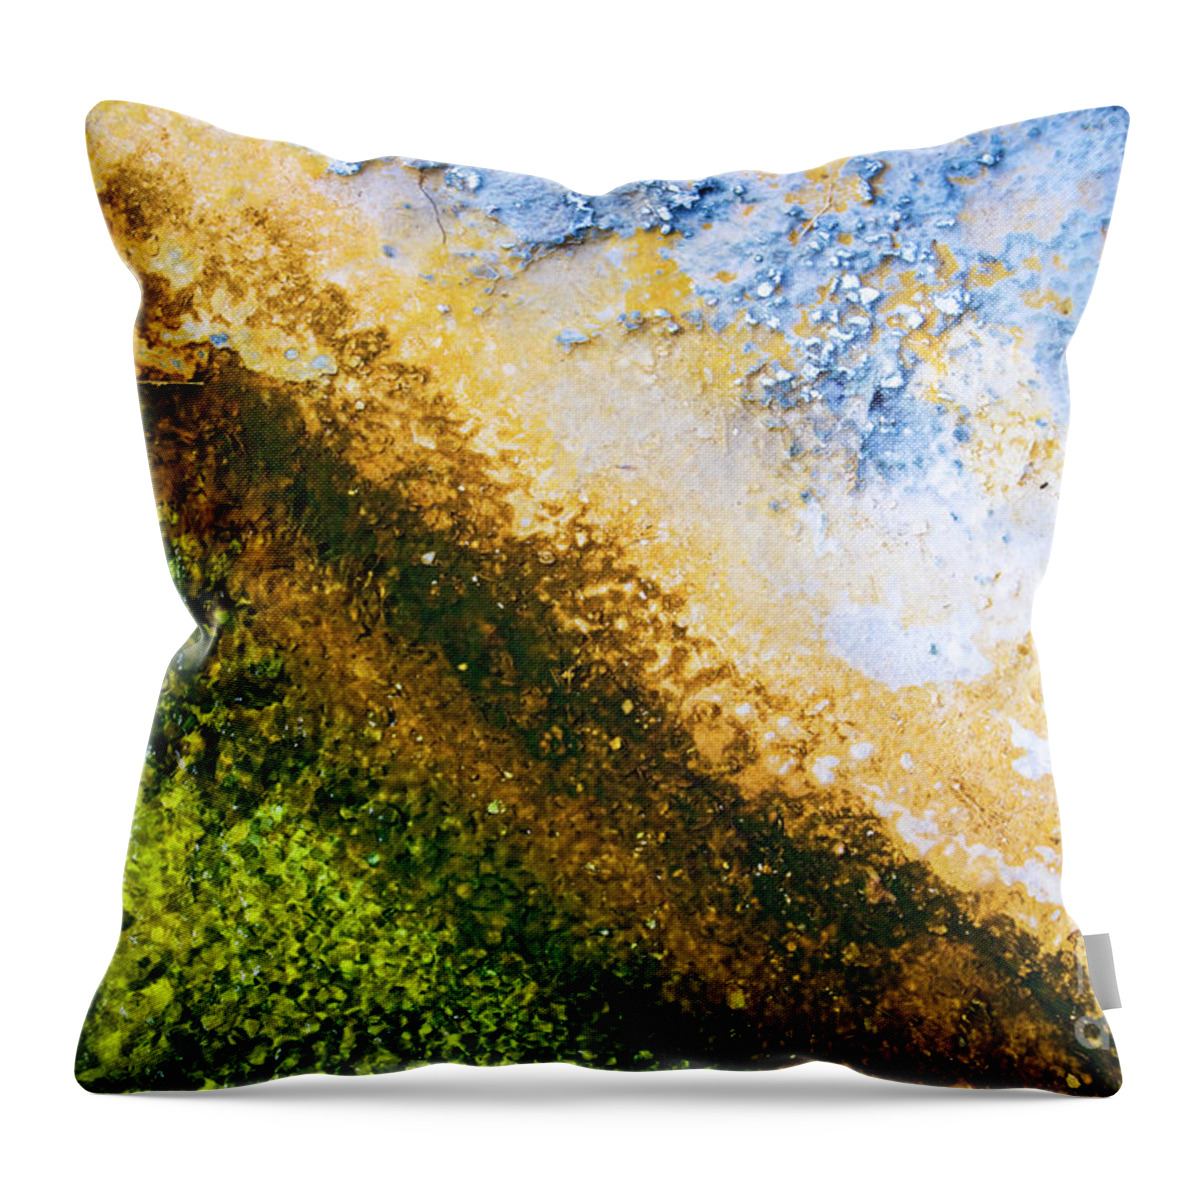 Yellowstone Throw Pillow featuring the photograph Yellowstone hot spring abstract colors by Delphimages Photo Creations